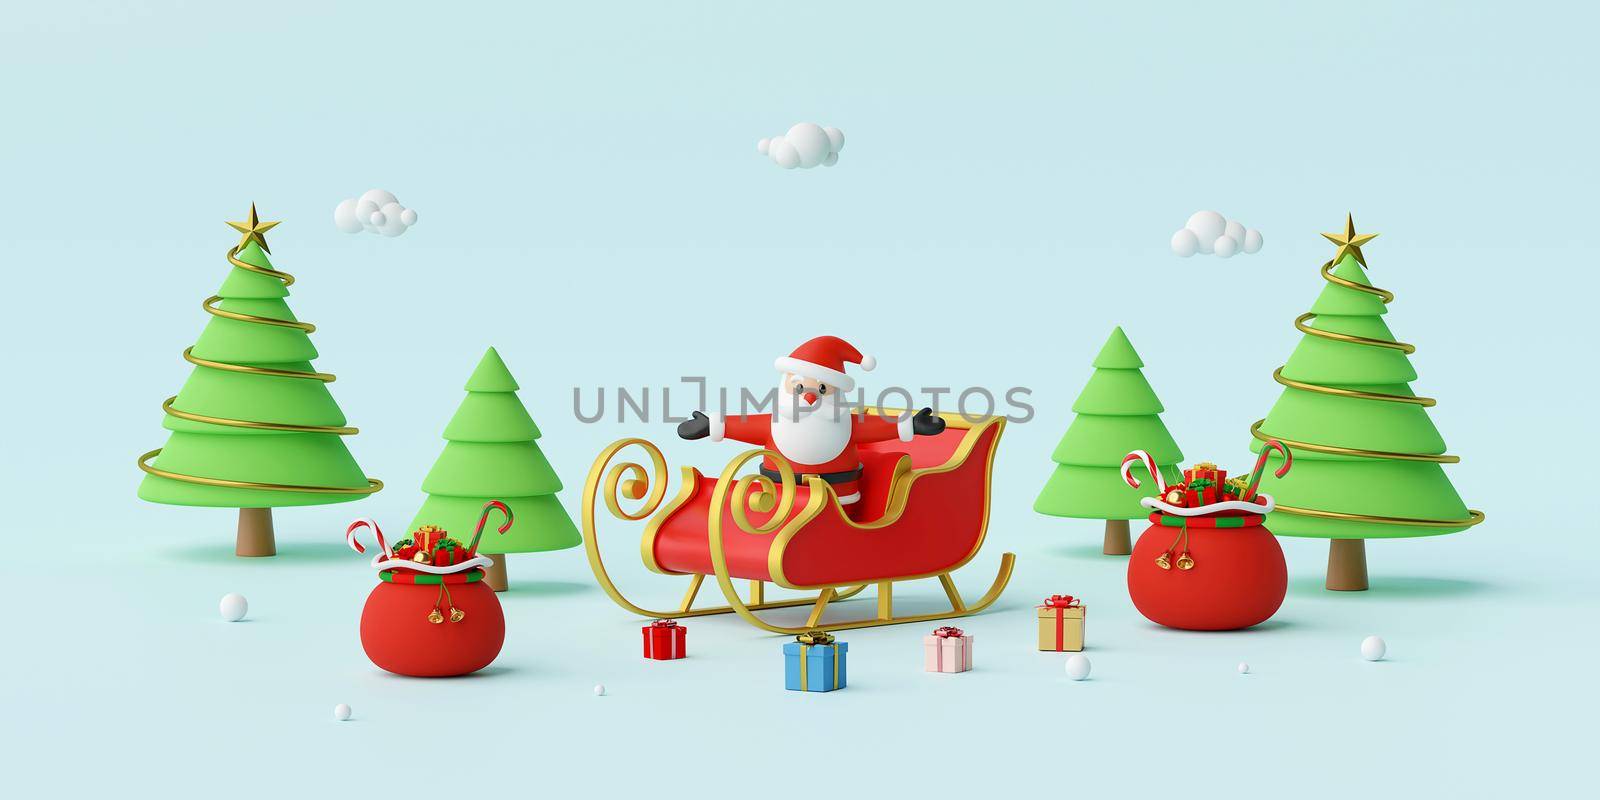 Merry Christmas and Happy New Year, Santa Claus on a Sleigh with Christmas gifts, 3d rendering by nutzchotwarut